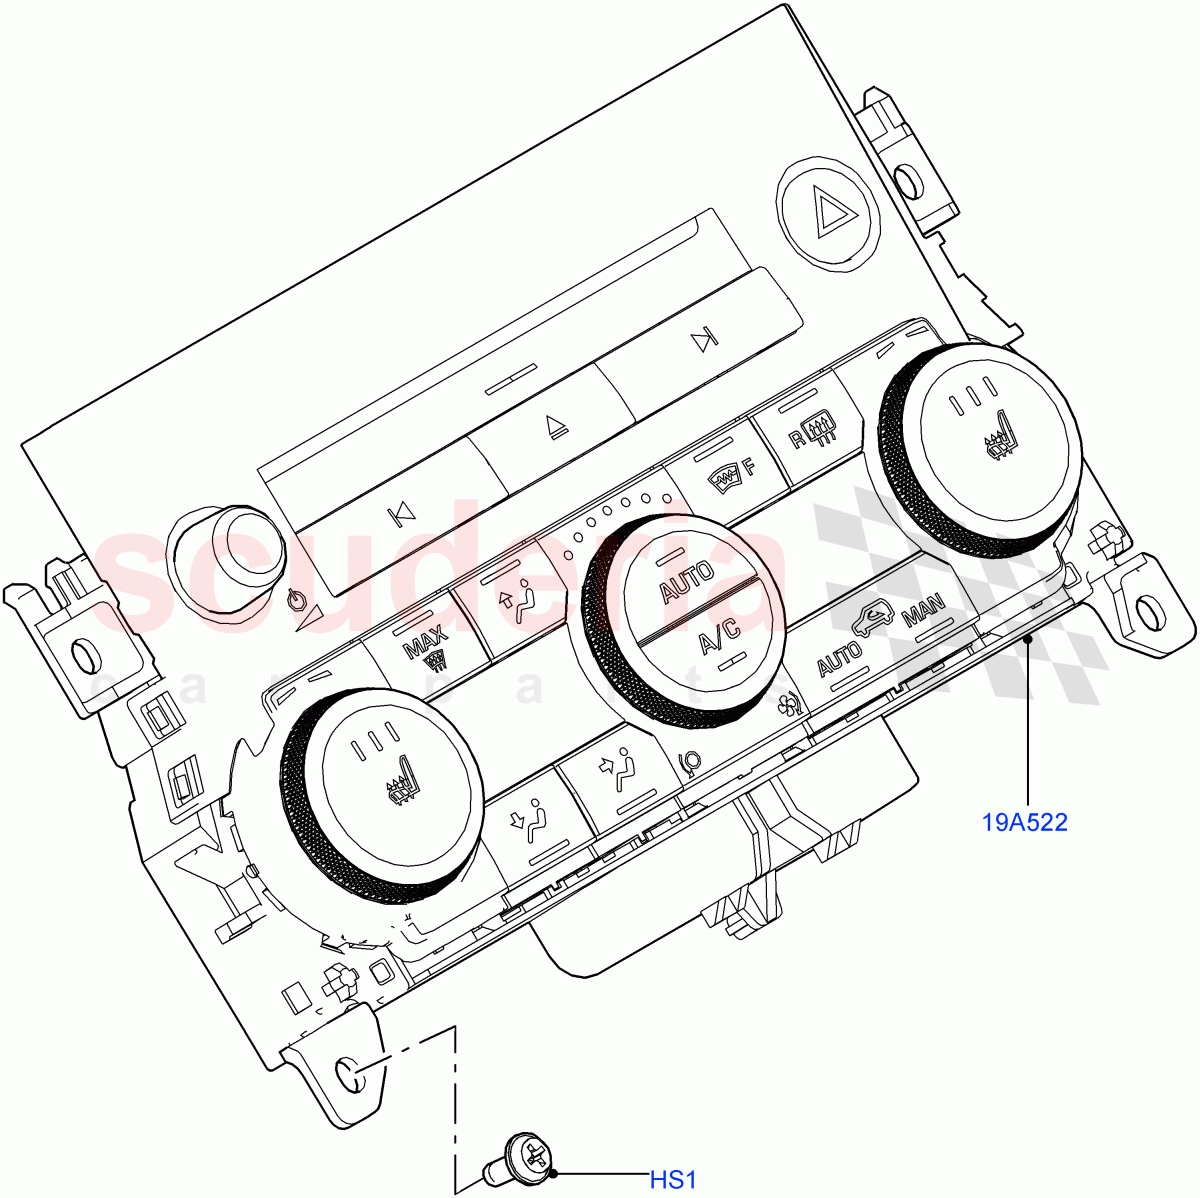 Heater & Air Conditioning Controls(Changsu (China))((V)FROMEG000001) of Land Rover Land Rover Range Rover Evoque (2012-2018) [2.2 Single Turbo Diesel]